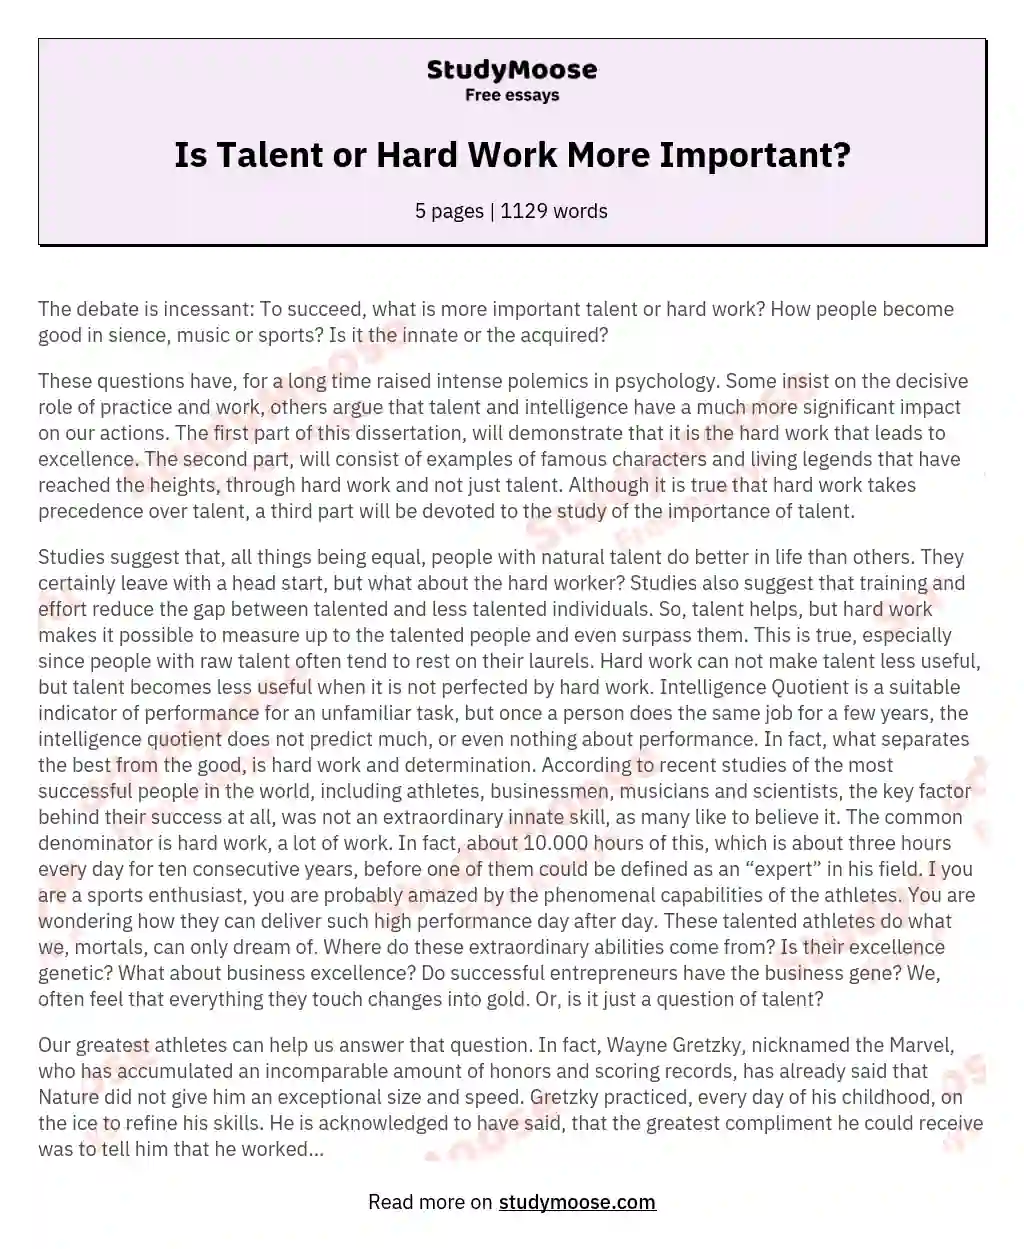 Is Talent or Hard Work More Important? essay